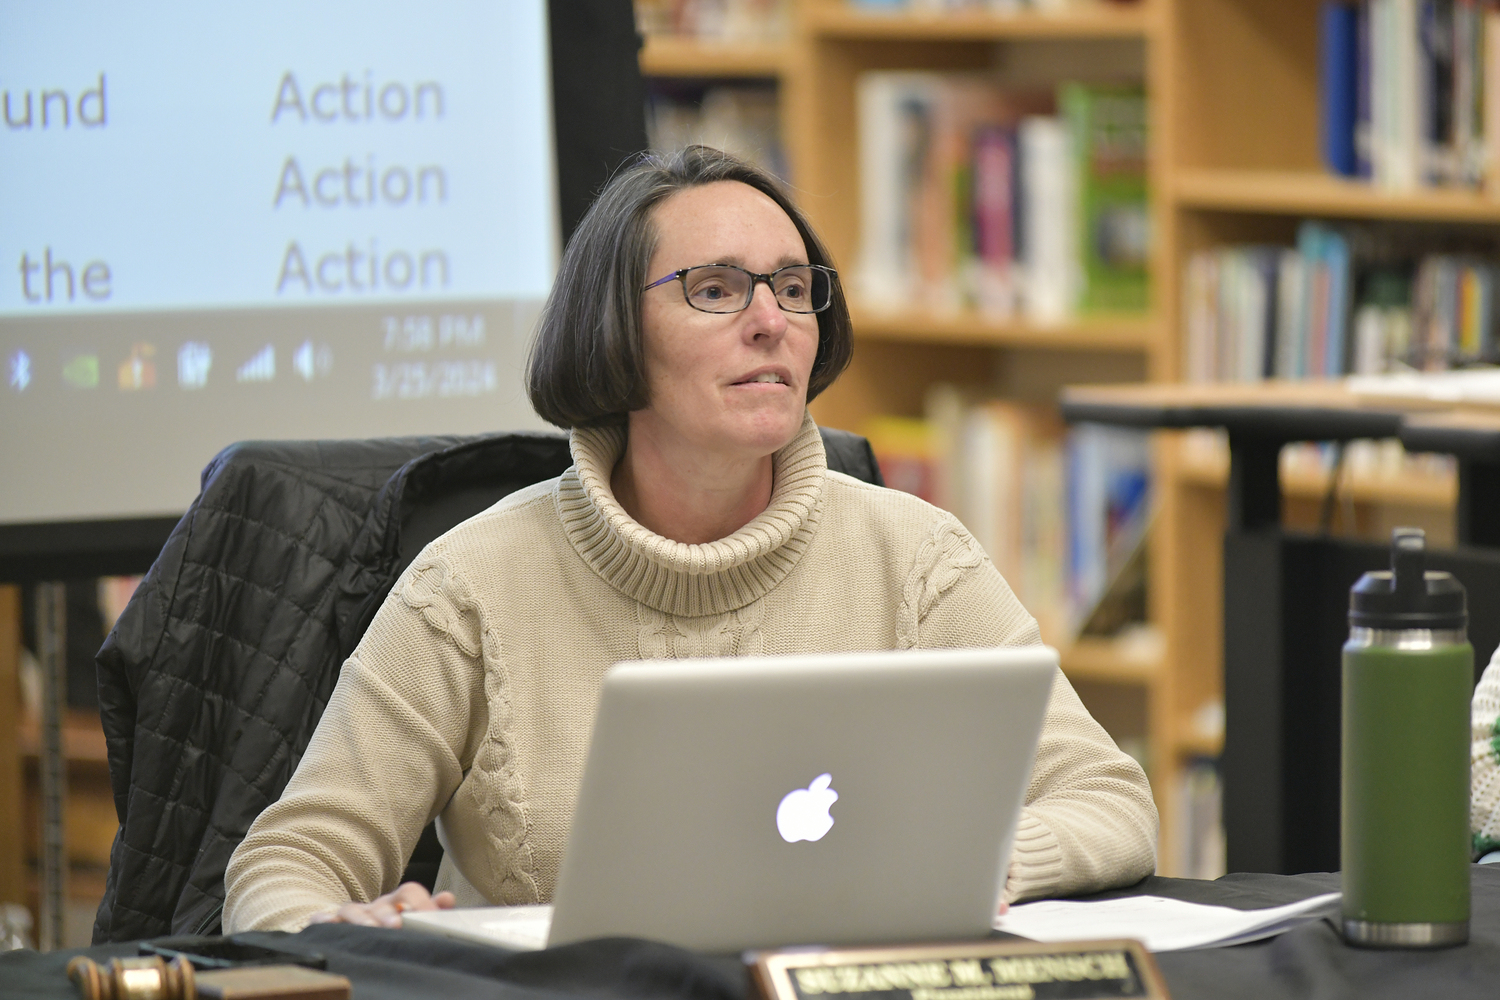 Westhampton Beach Board of Education President Suzanne Mensch fields a question at Monday night's meeting.  DANA SHAW